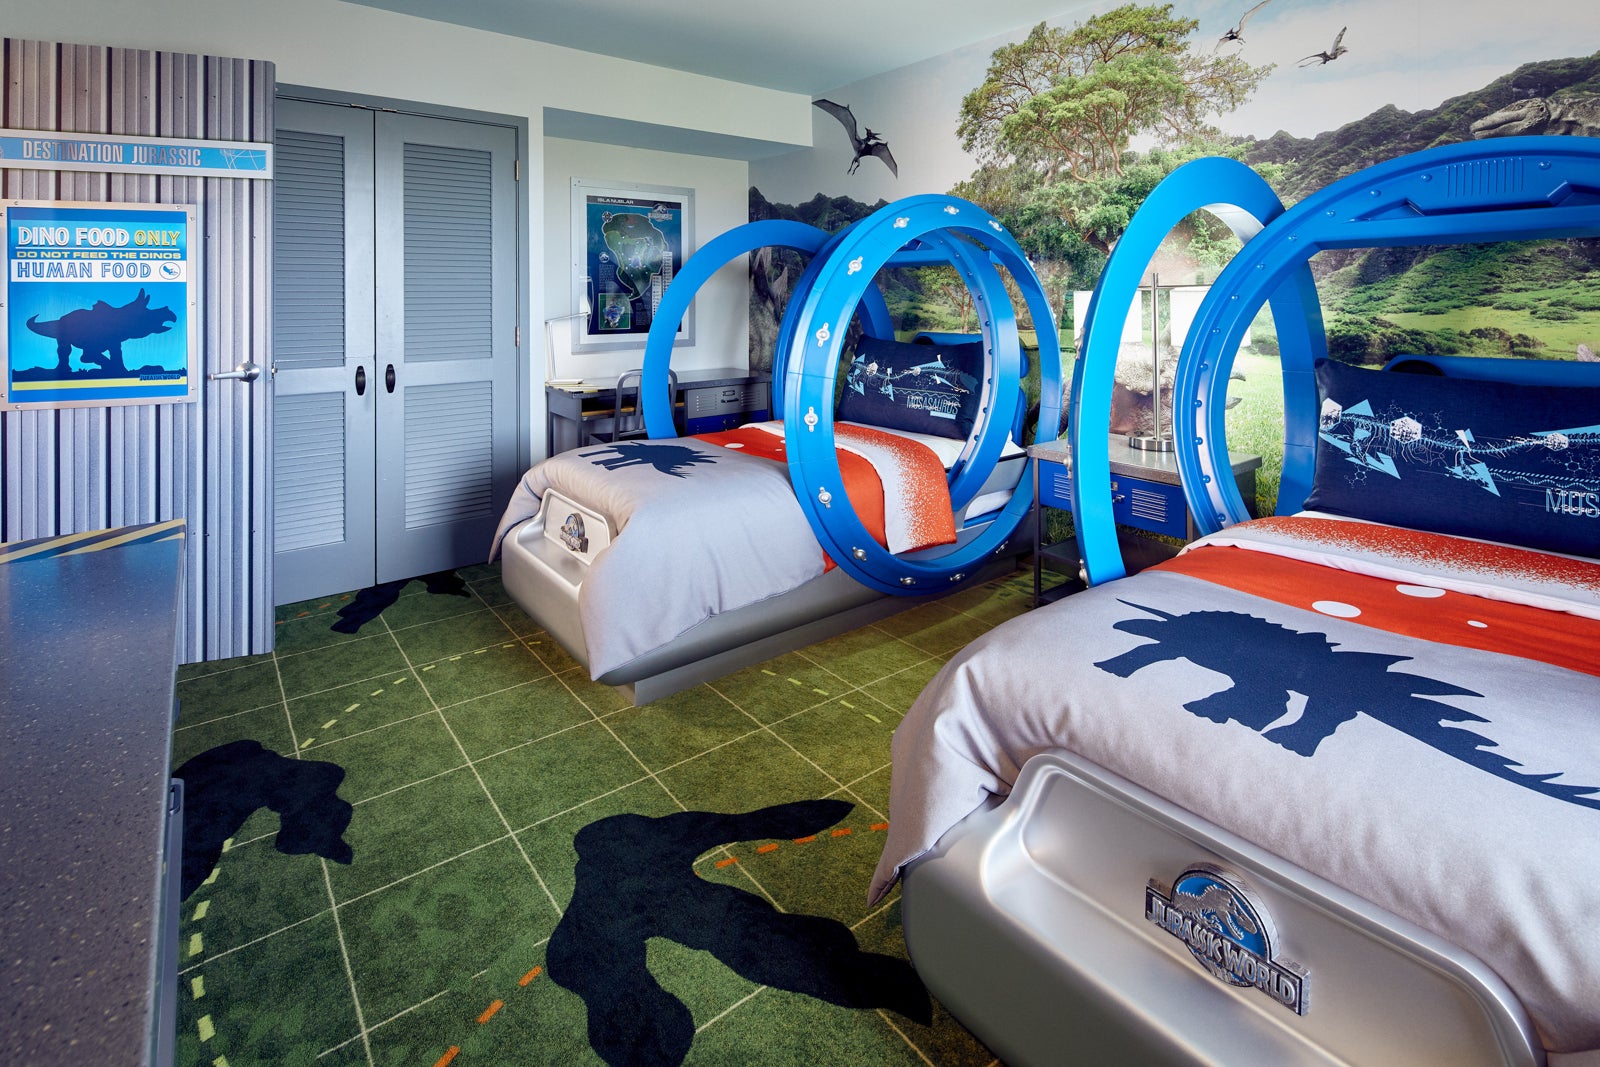 Jurassic World themed hotel suite